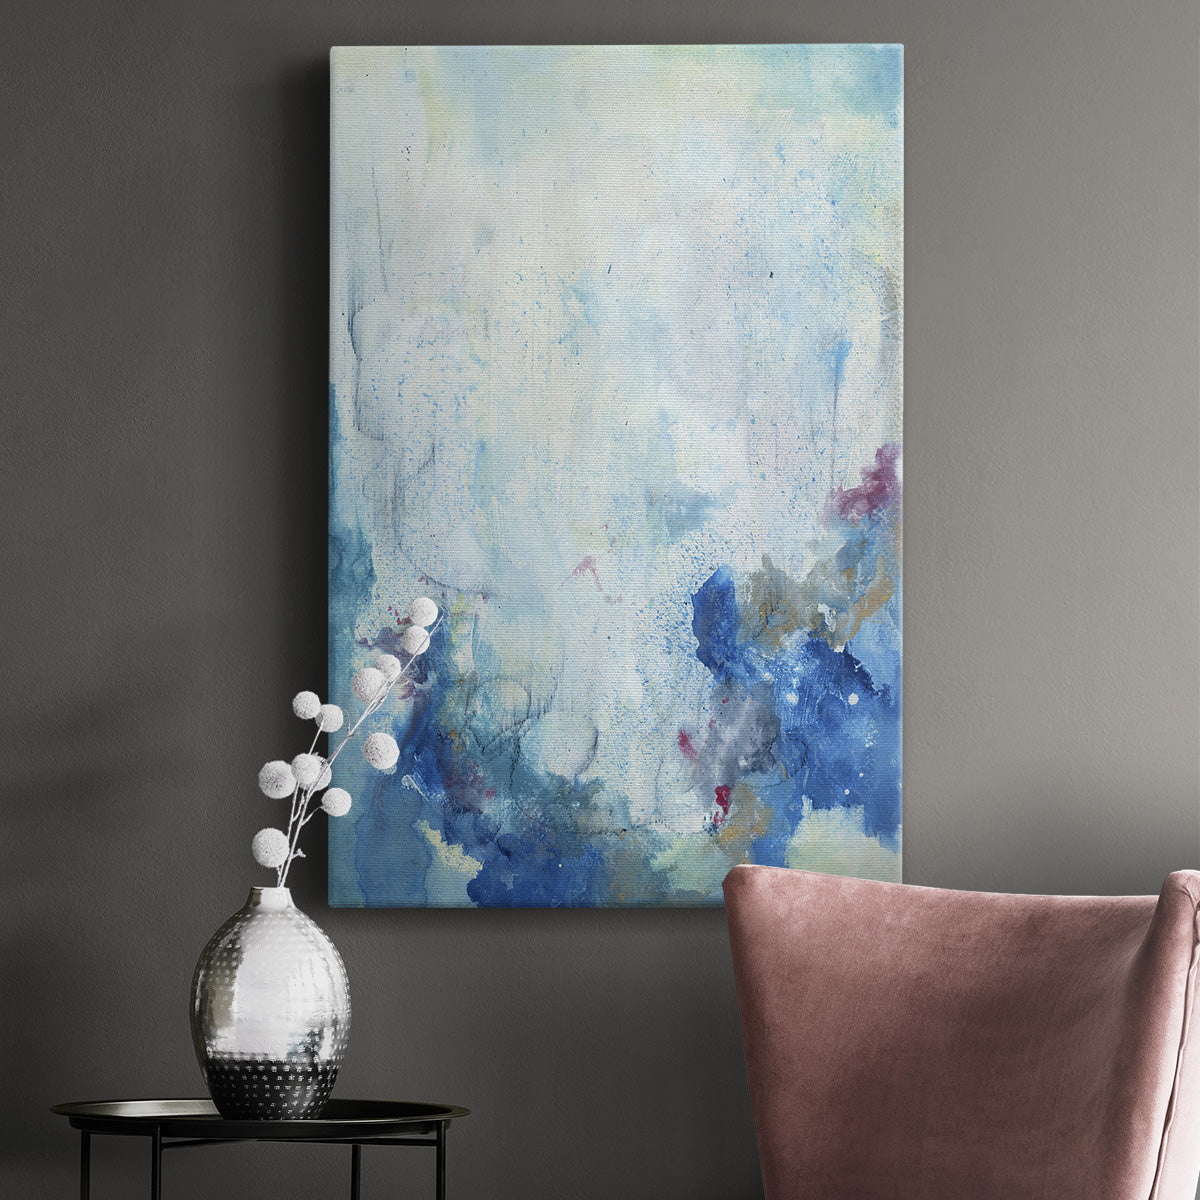 In the Mist II Premium Gallery Wrapped Canvas - Ready to Hang